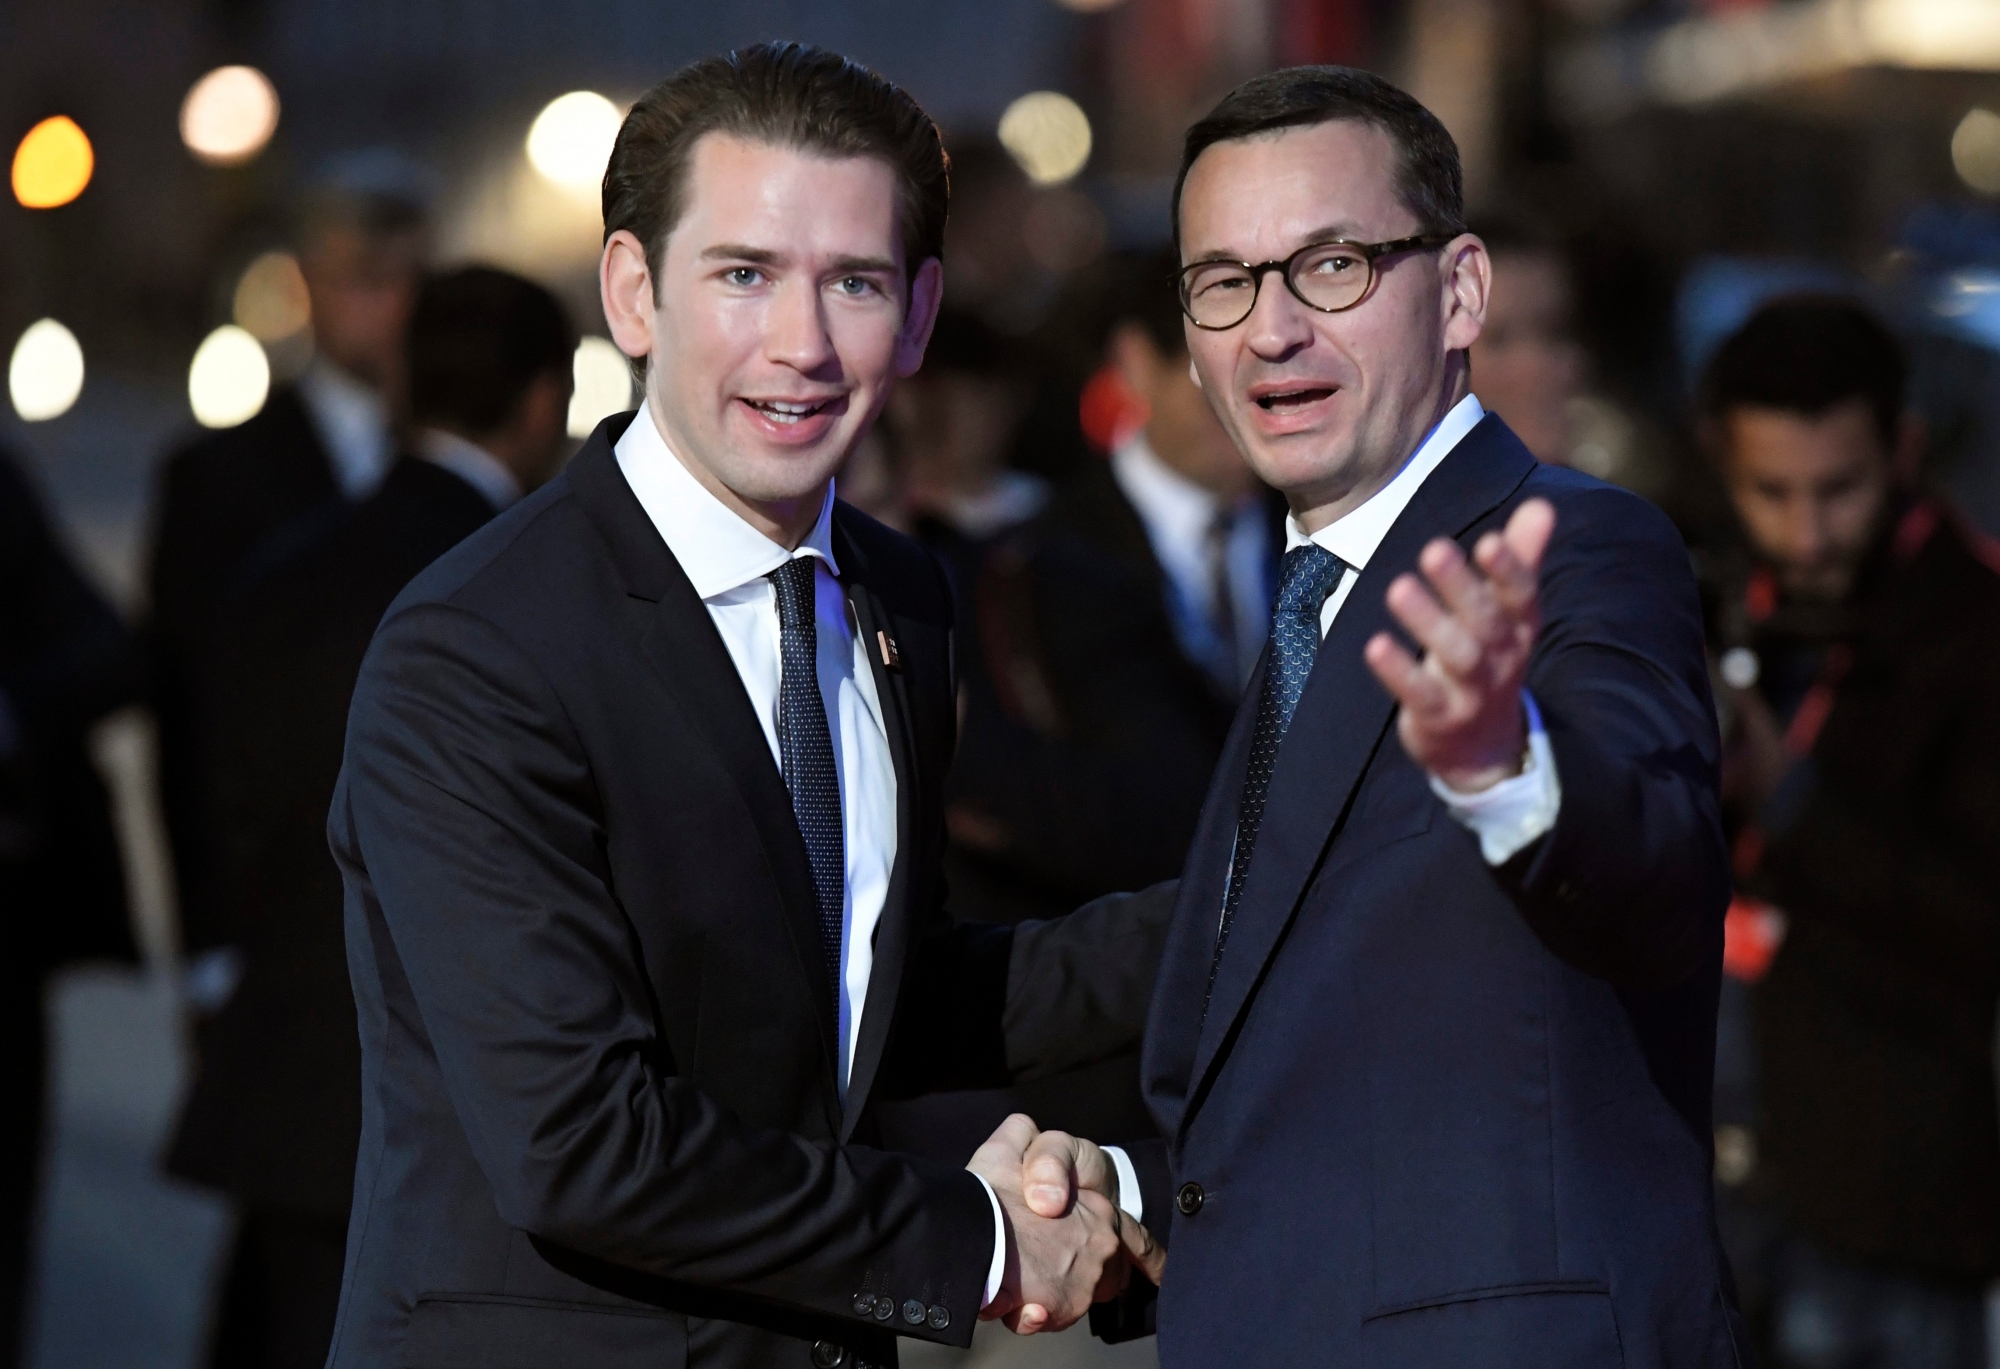 epa07032850 Federal Chancellor of Austria Sebastian Kurz (L) greets Prime Minister of Poland Mateusz Morawiecki (R), as he arrives for a dinner at the Felsenreitschule theatre, during the European Union's (EU) Informal Heads of State Summit in Salzburg, Austria, 19 September 2018. EU countries' leaders meet on 19 and 20 September for a summit to discuss internal security measures, migration and Brexit.  EPA/CHRISTIAN BRUNA AUSTRIA EU SUMMIT